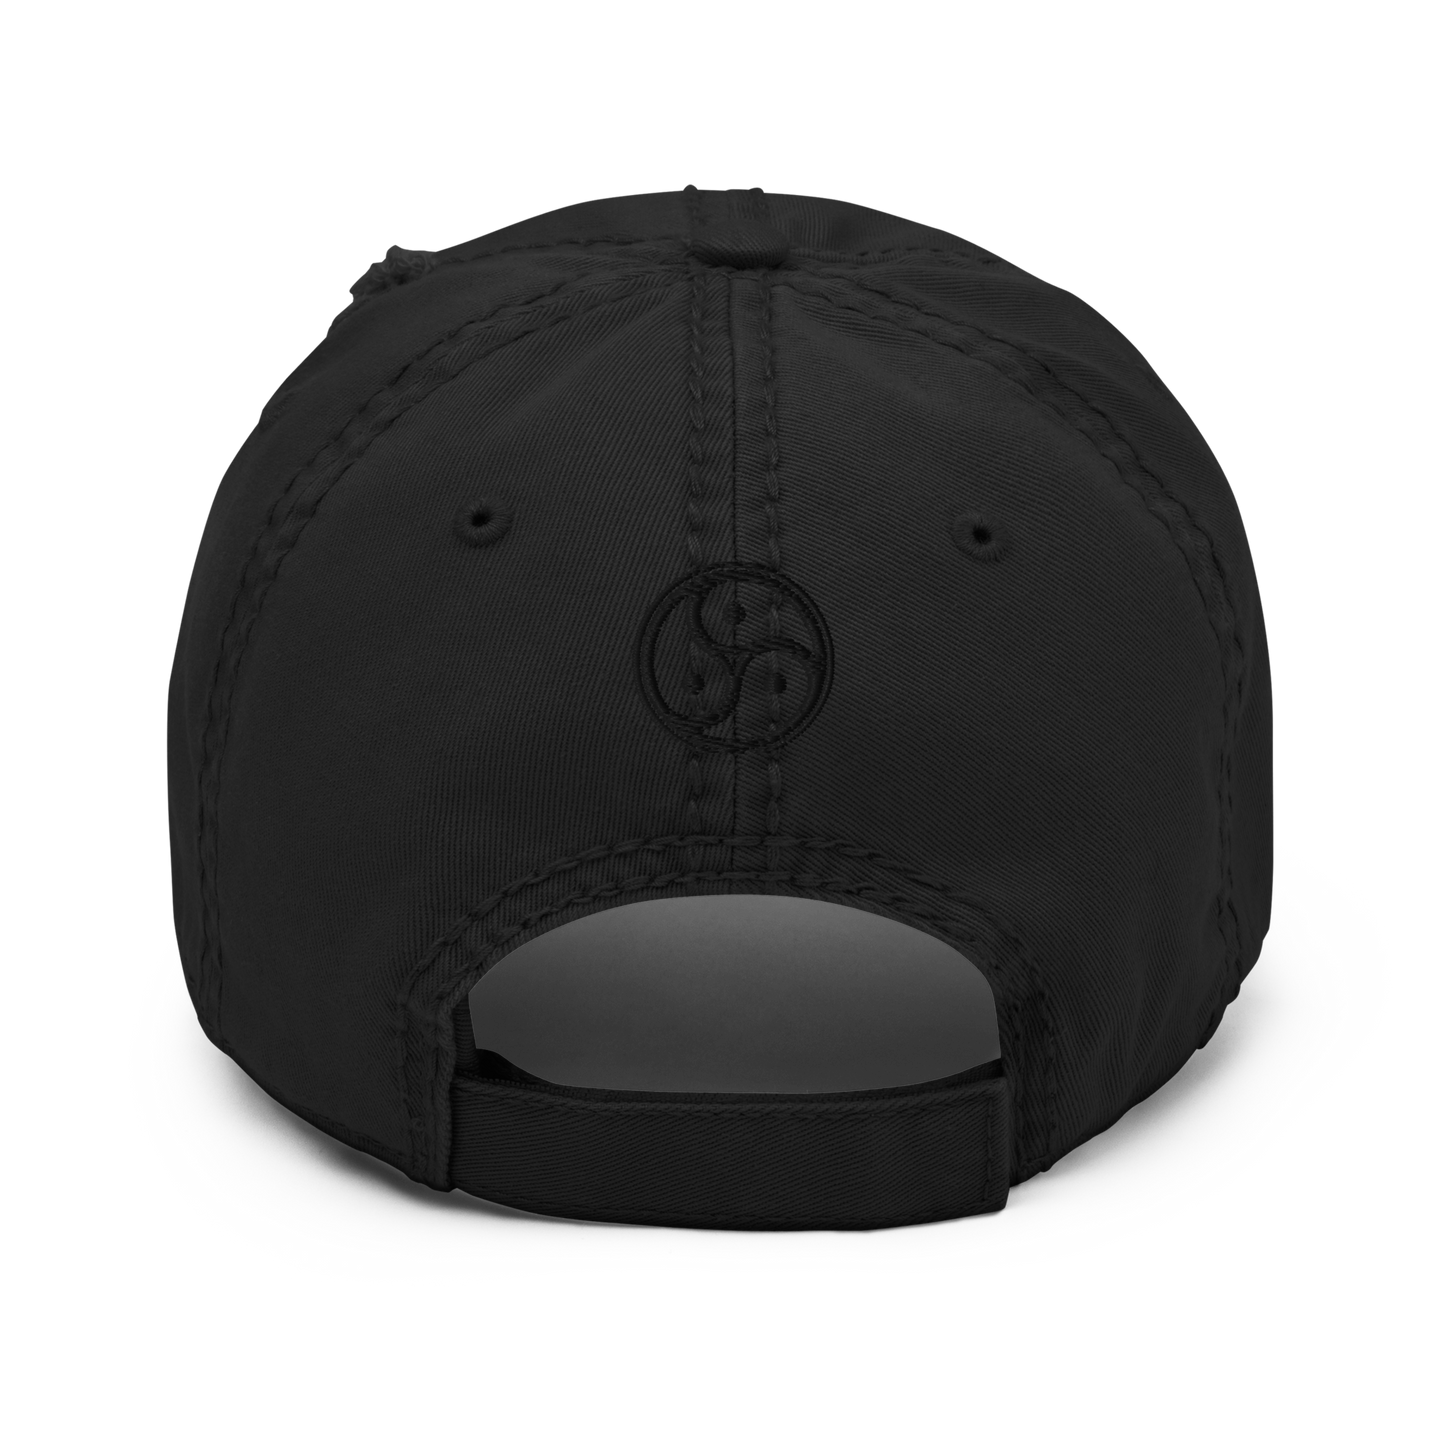 All things are black distressed logo hat